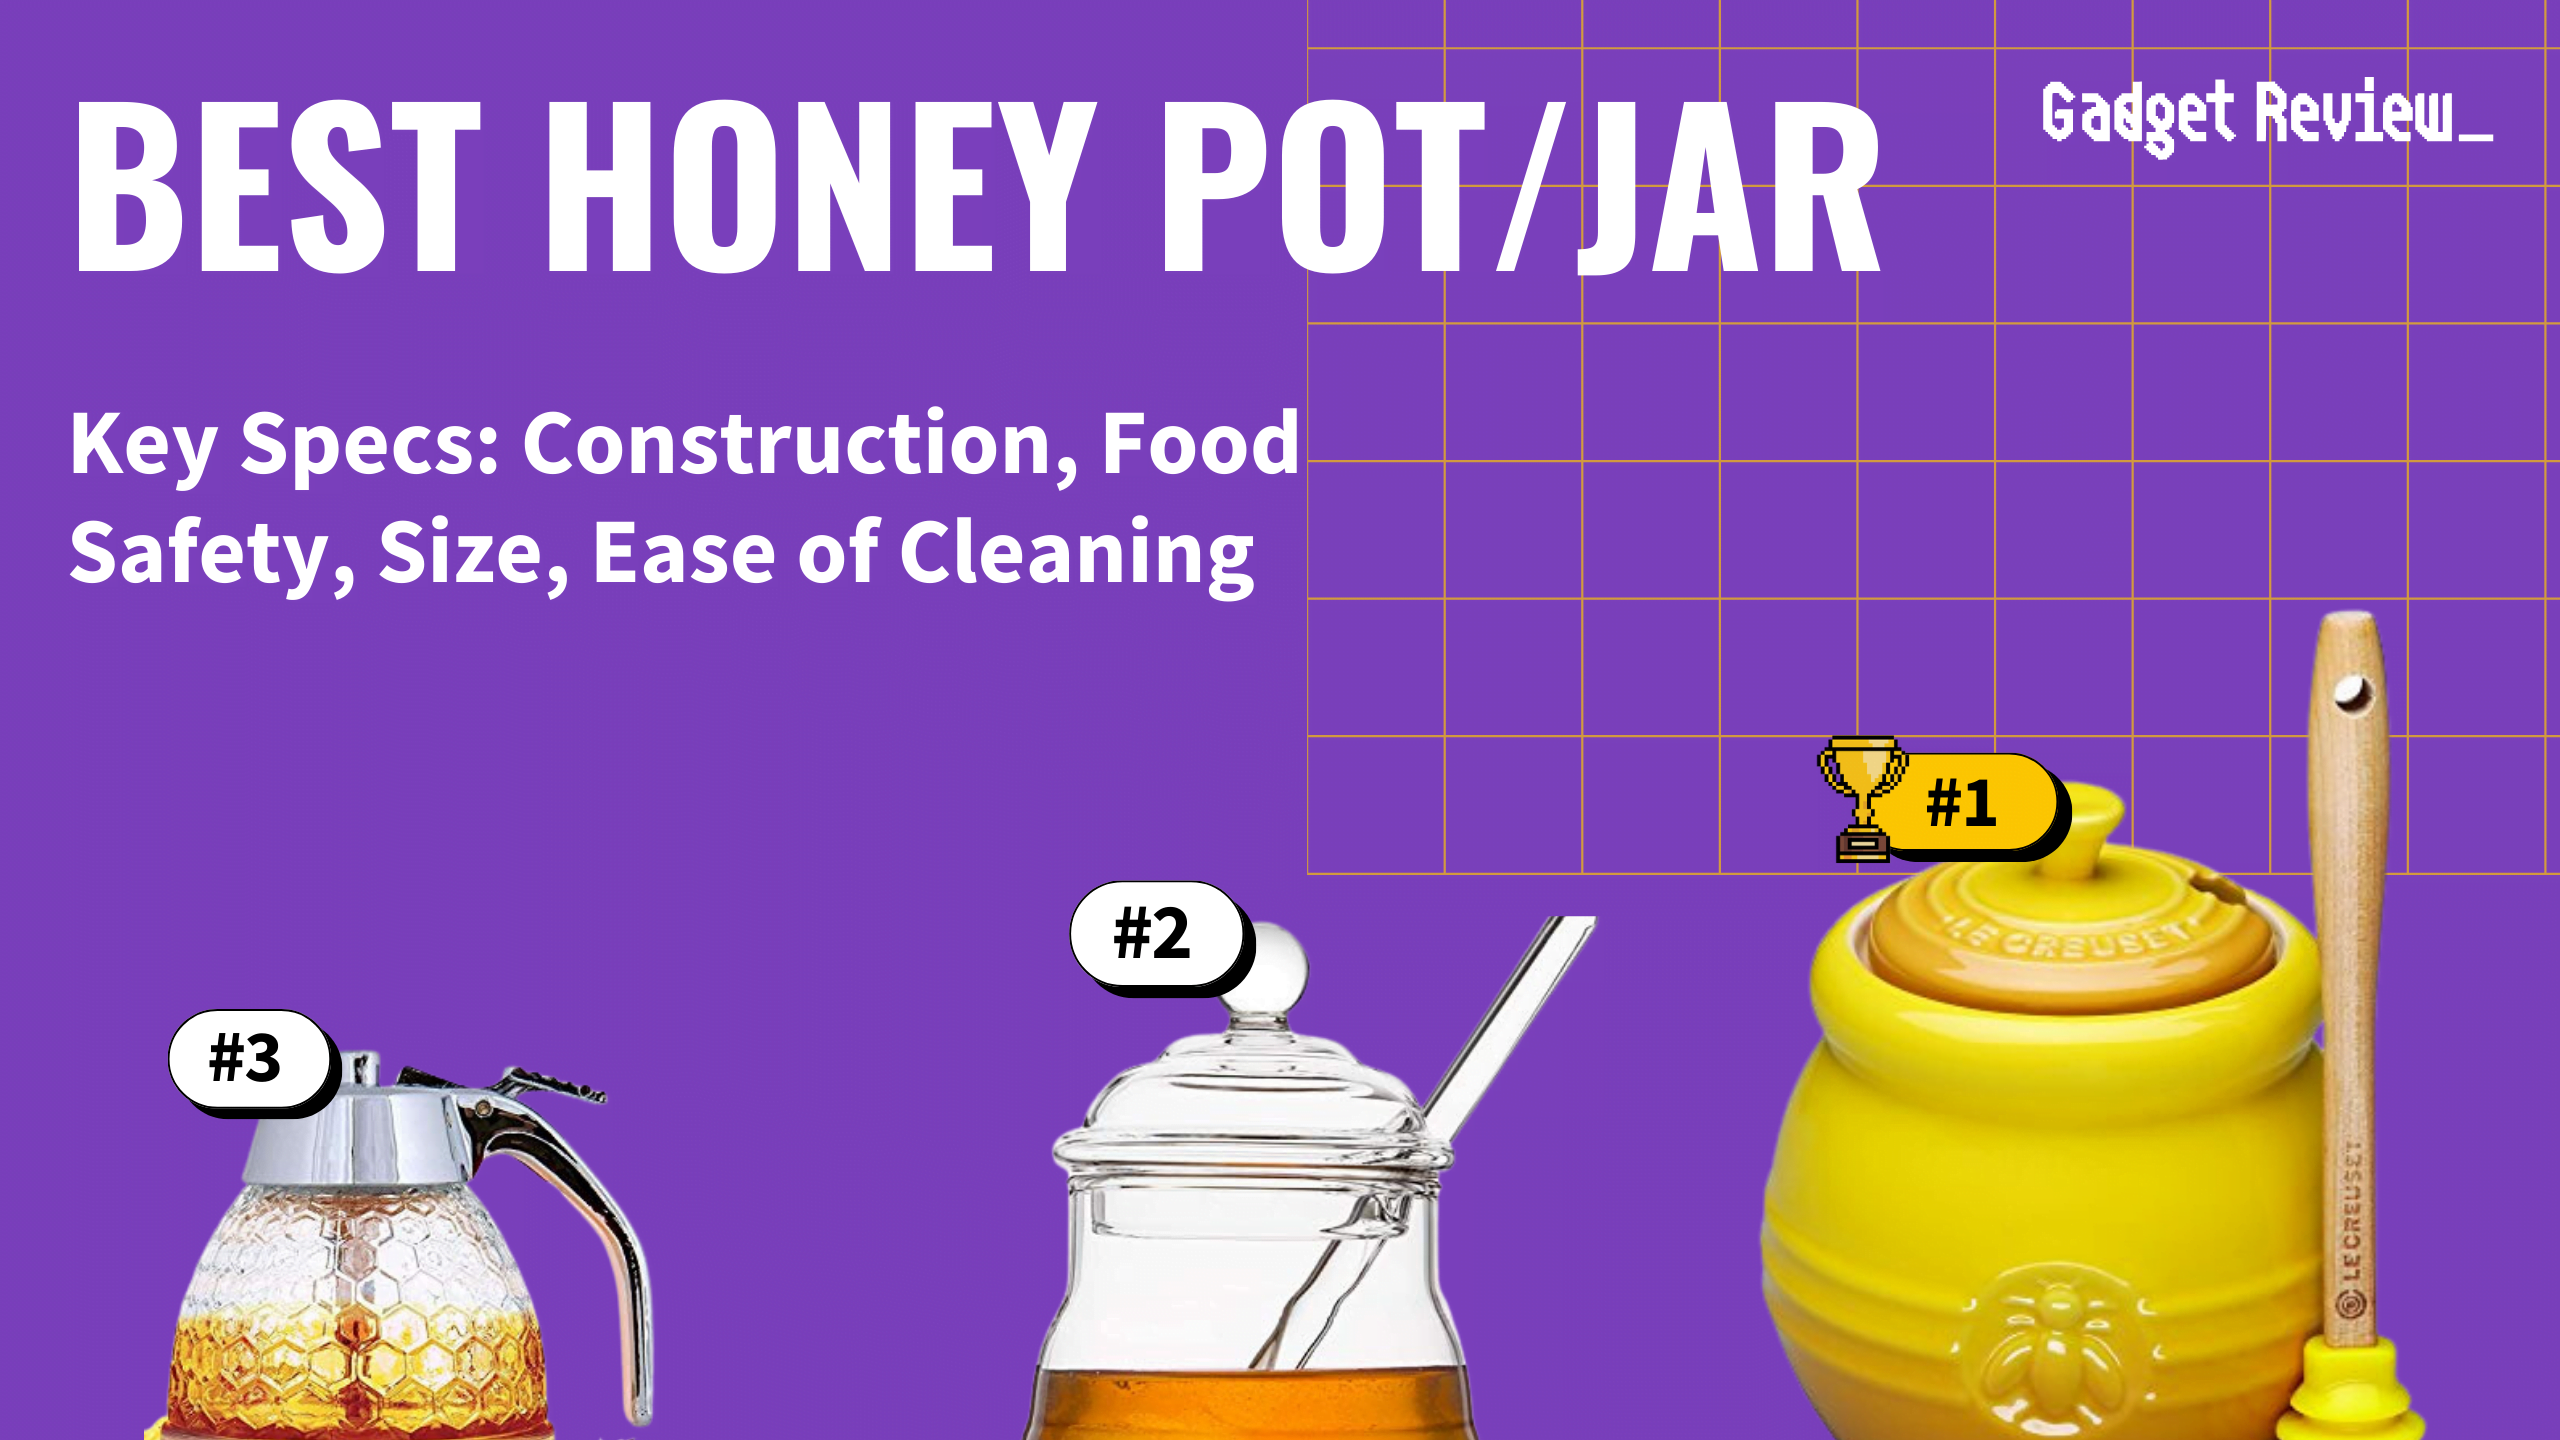 best honey pot jar featured image that shows the top three best kitchen product models